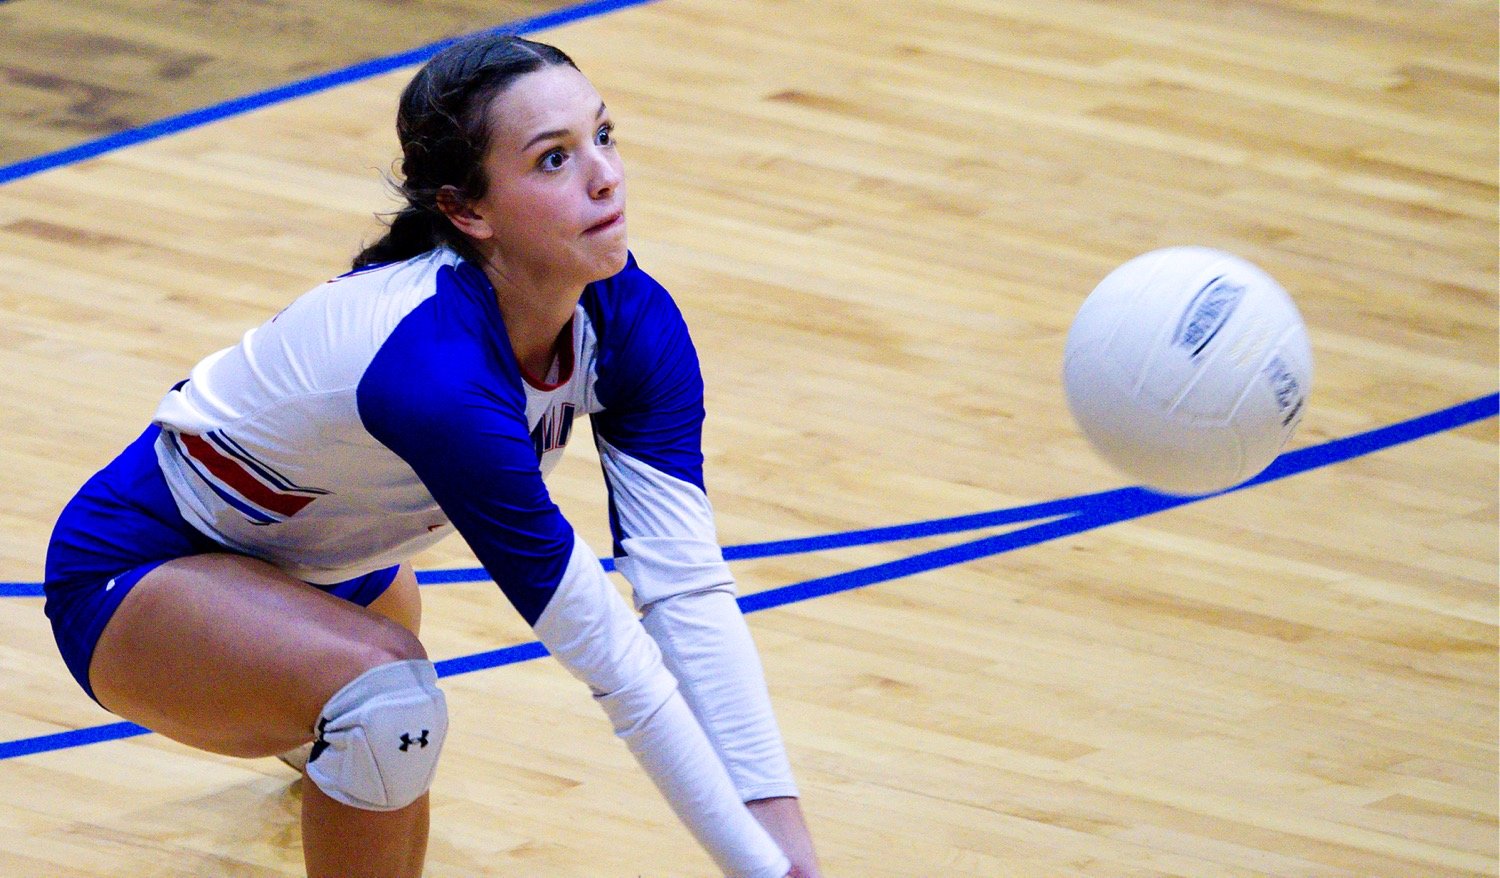 Kallie Hoover eyes the ball as she lunges forward for a dig. [view more volleyball shots]